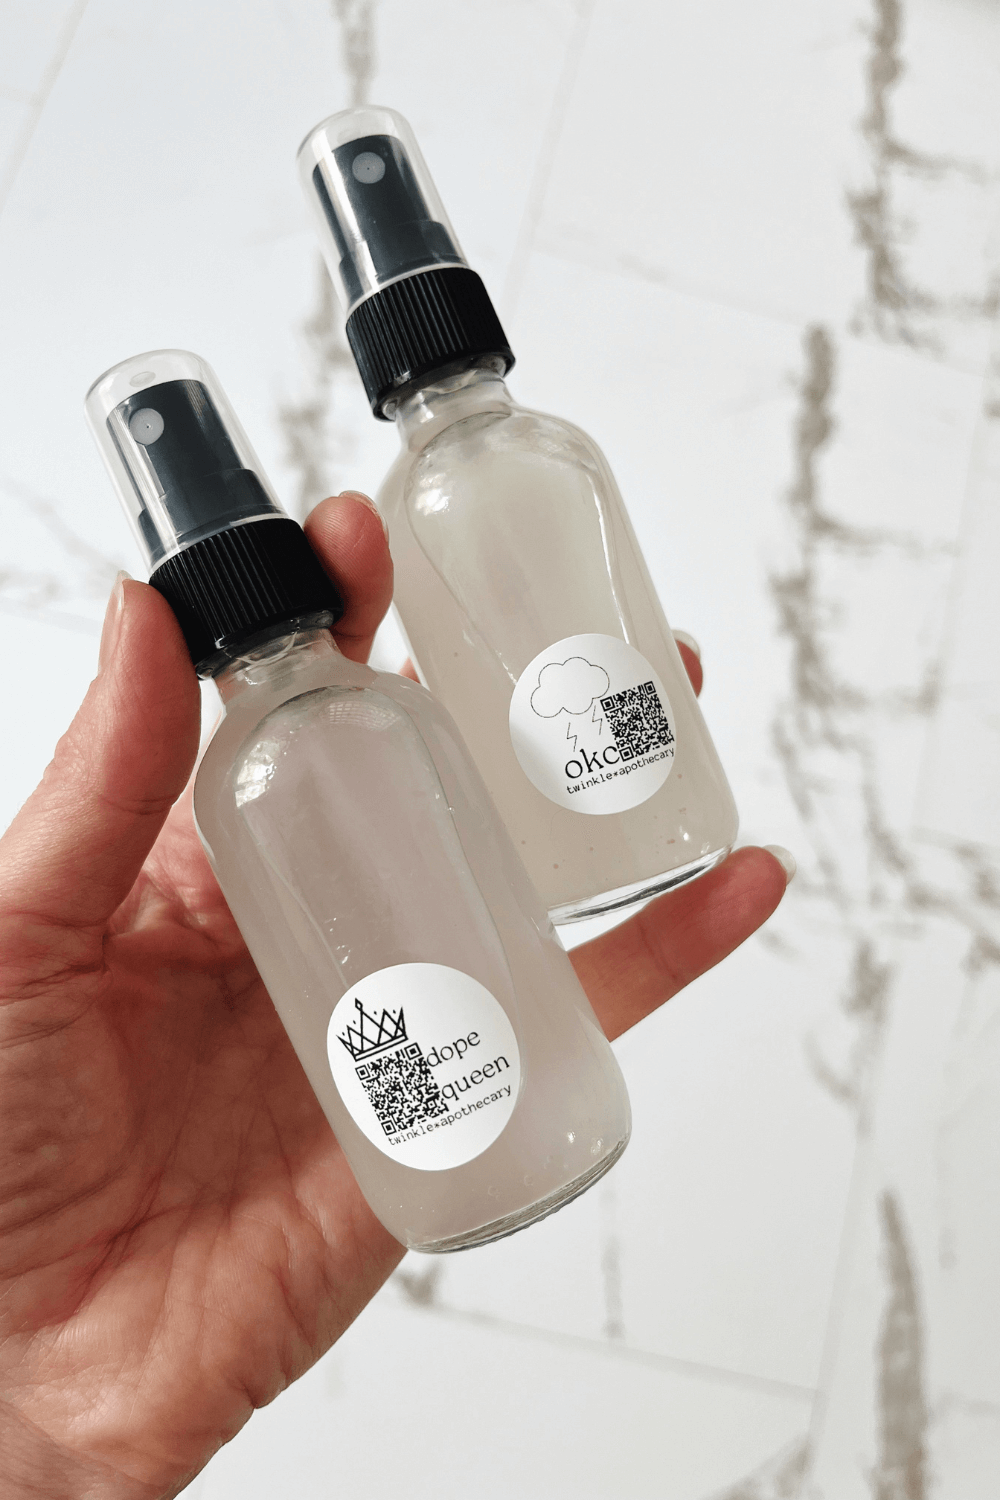 dope queen and OKC natural scented body sprays by twinkle apothecary 